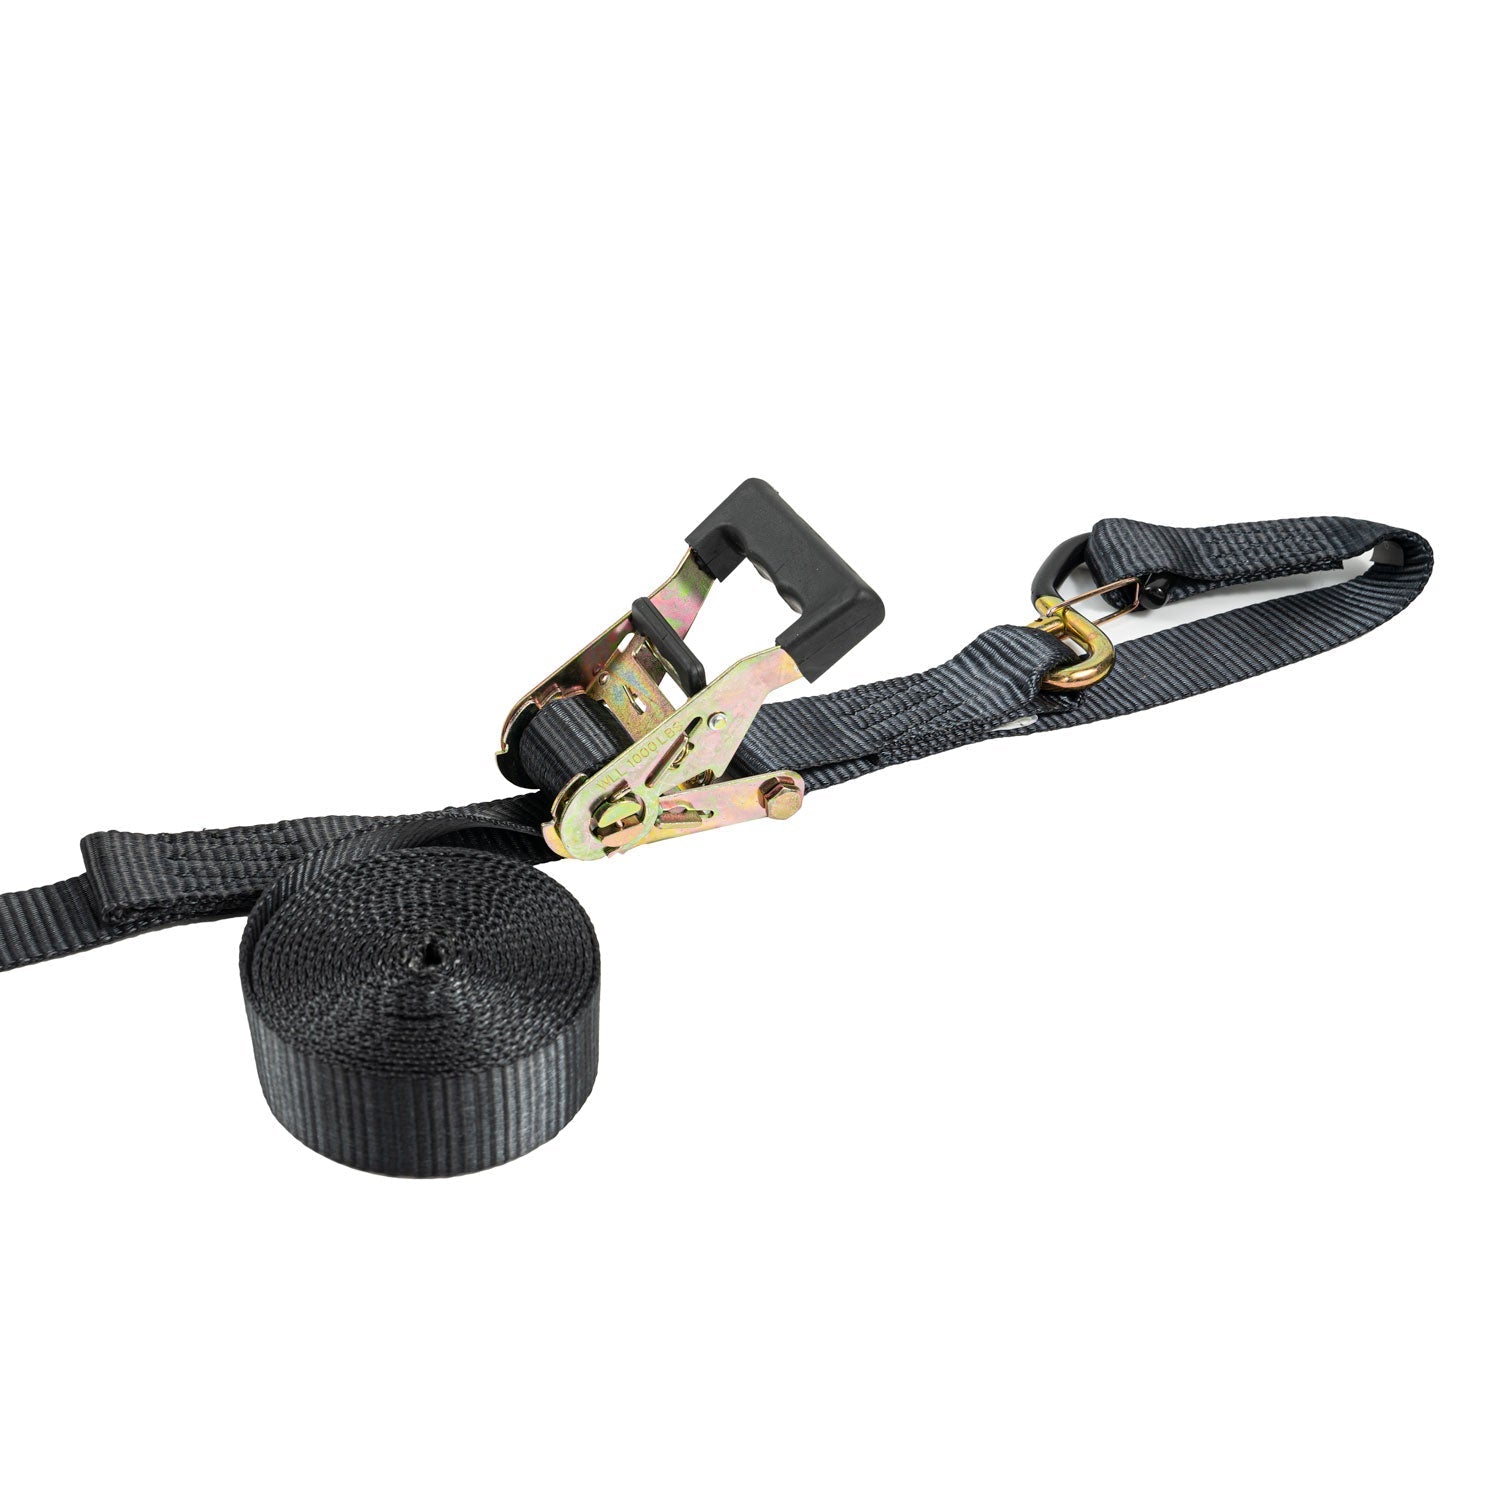 15ft x 1.5in ANCHOR STRAPS Ratchet Strap: 1000lb WLL, 3,000lb Break Strength - The Perfect Bungee & ShockStrap Tie Downs